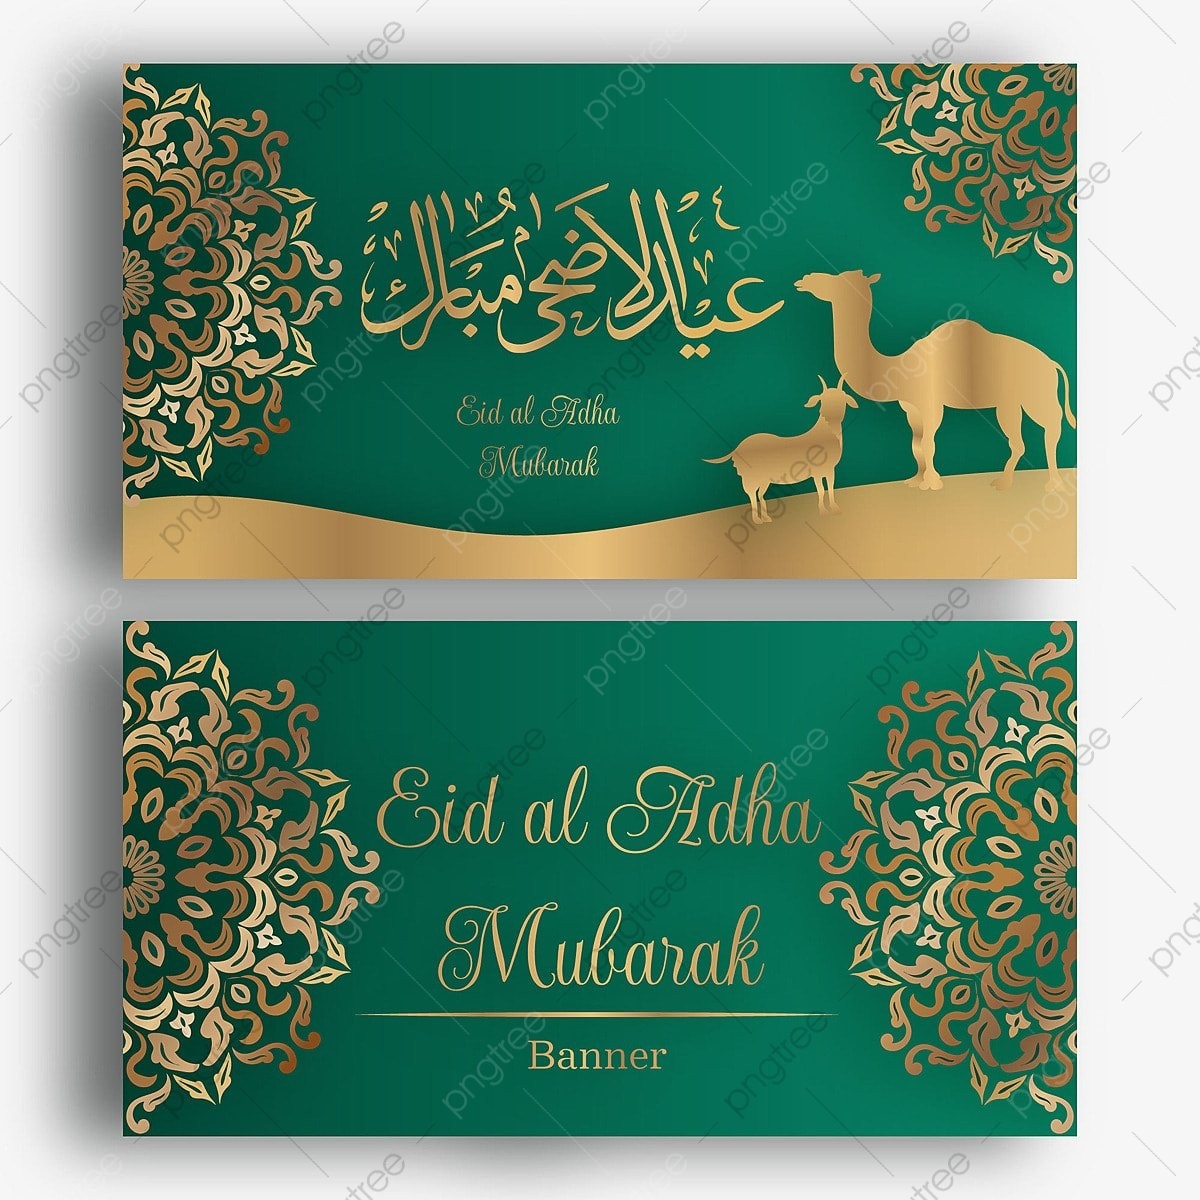 pngtree-eid-al-adha-banner-and-islamic-background-template-png-image_8067054.png